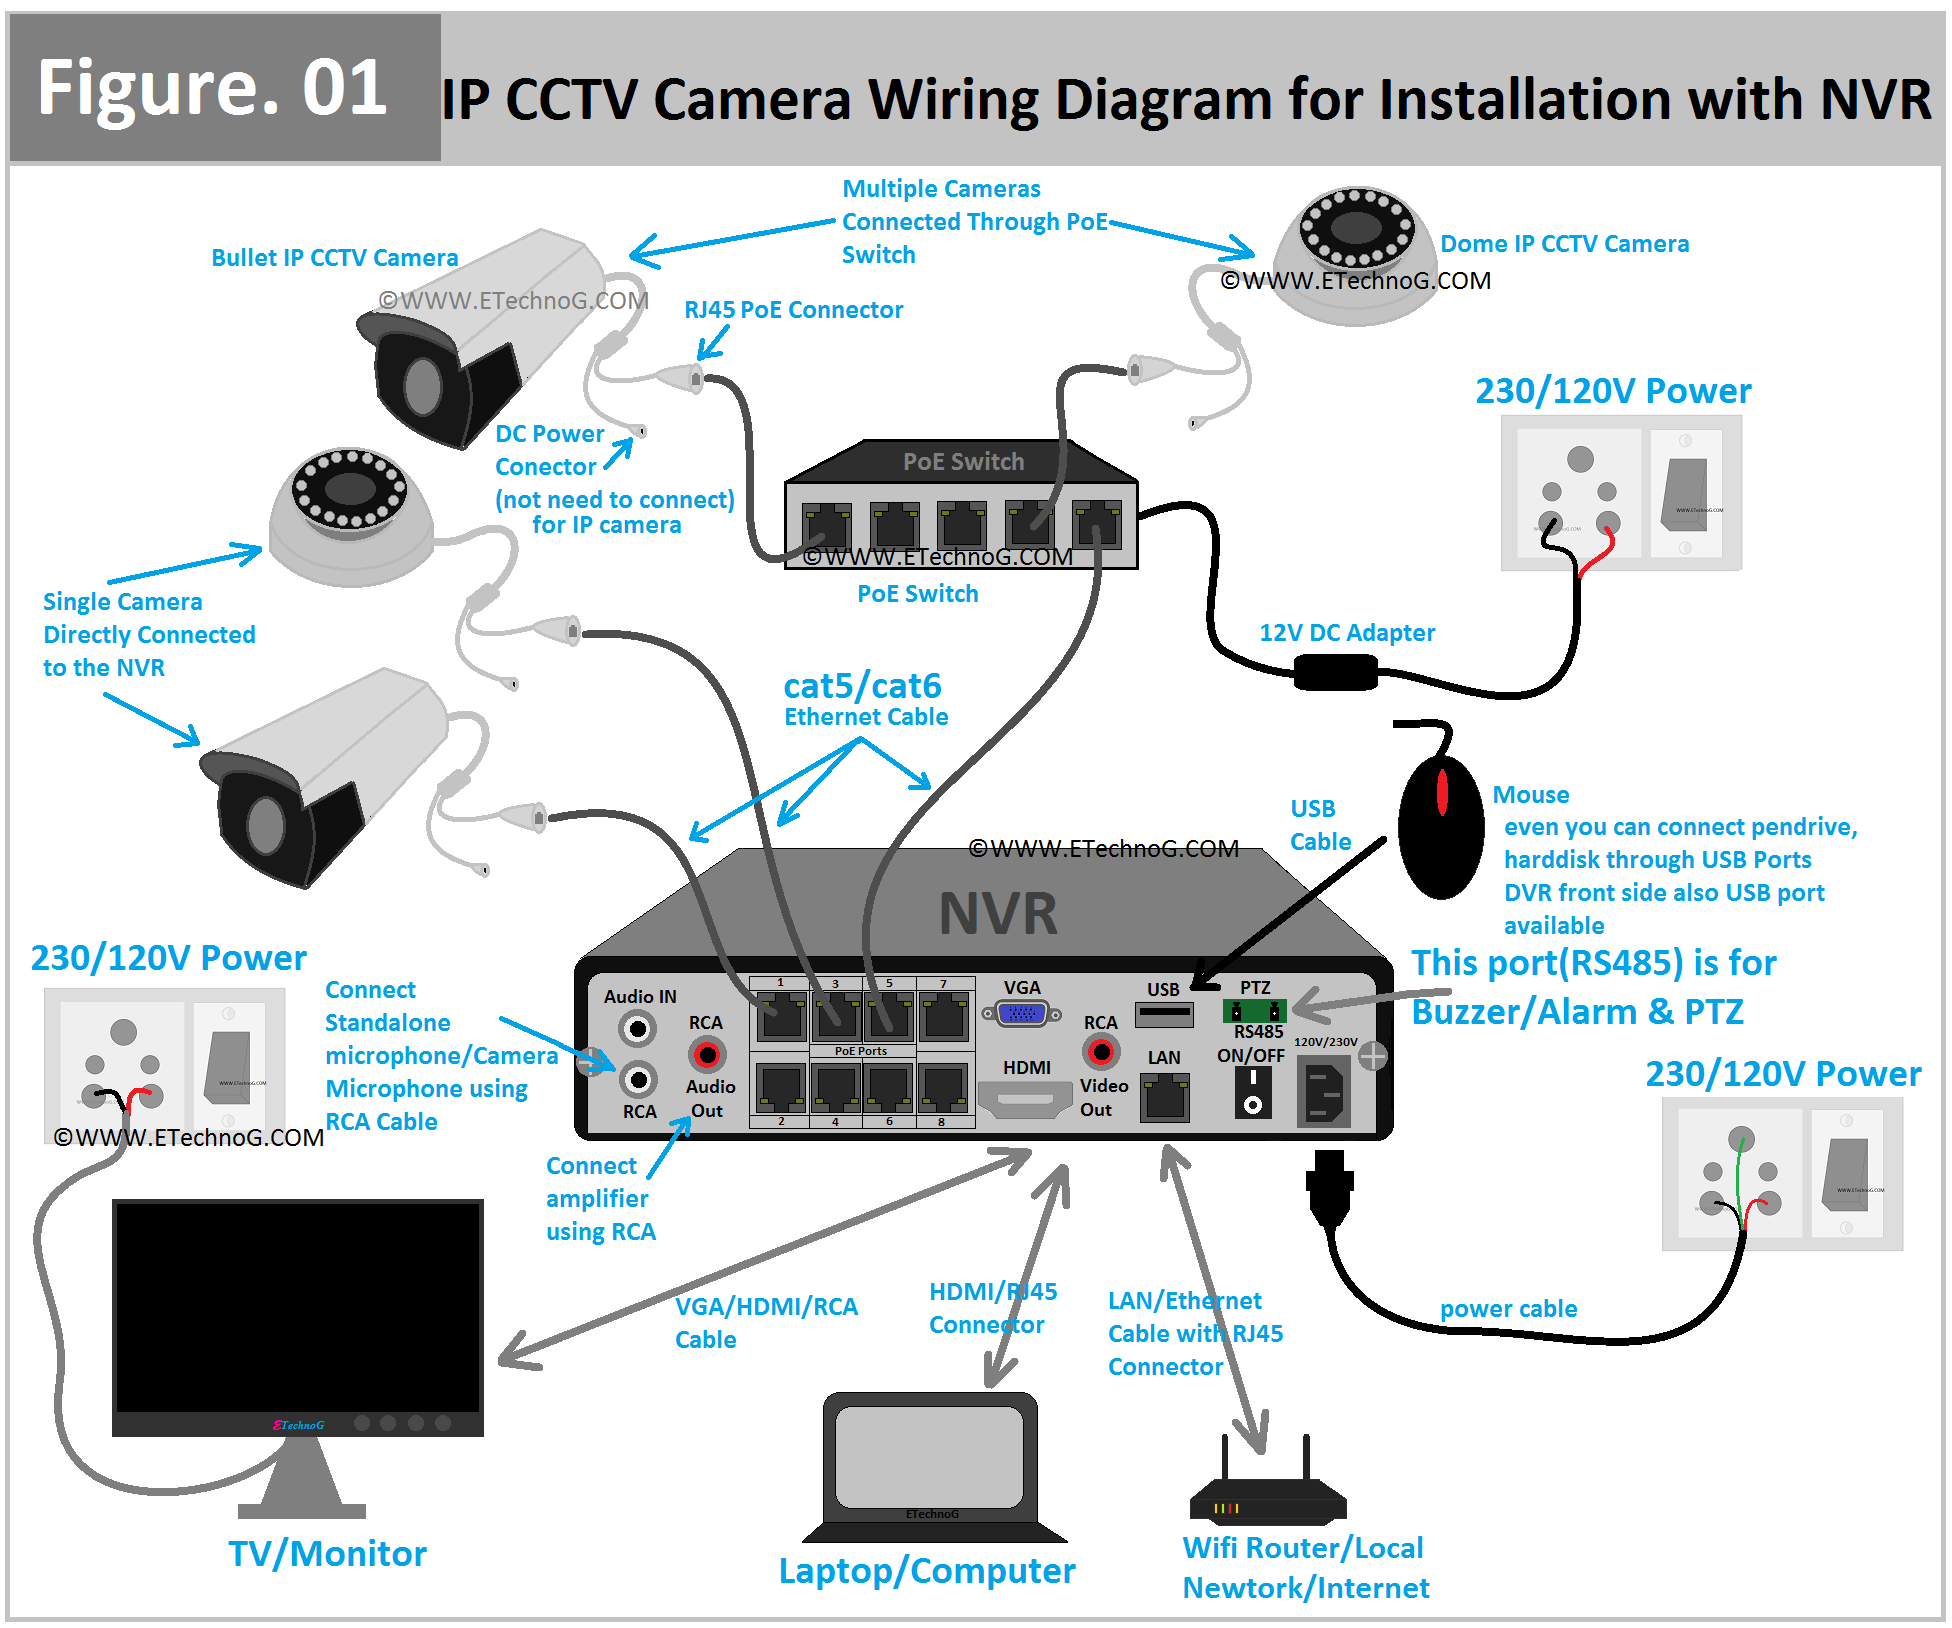 IP CCTV Camera Wiring Diagram and Connection Procedure for Installation with NVR